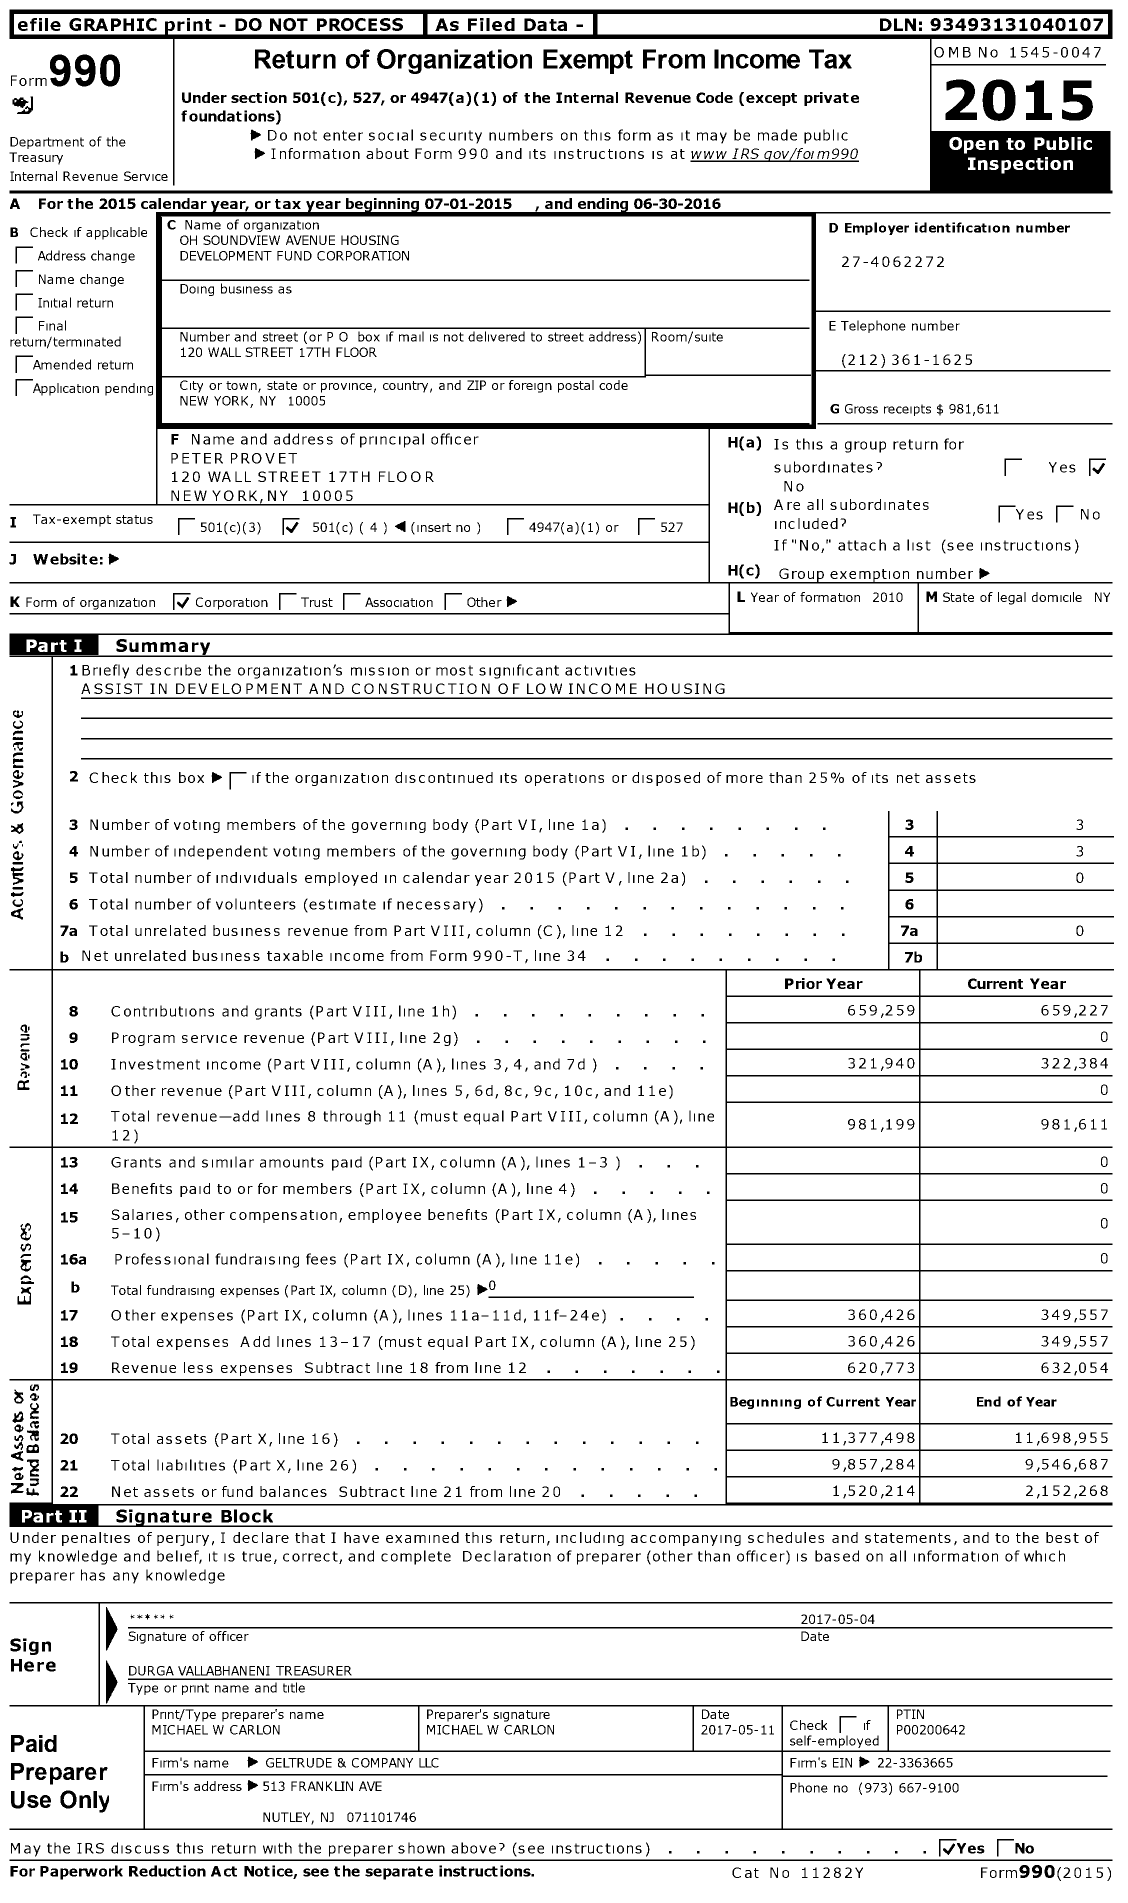 Image of first page of 2015 Form 990O for Oh Soundview Avenue Housing Development Fund Corporation